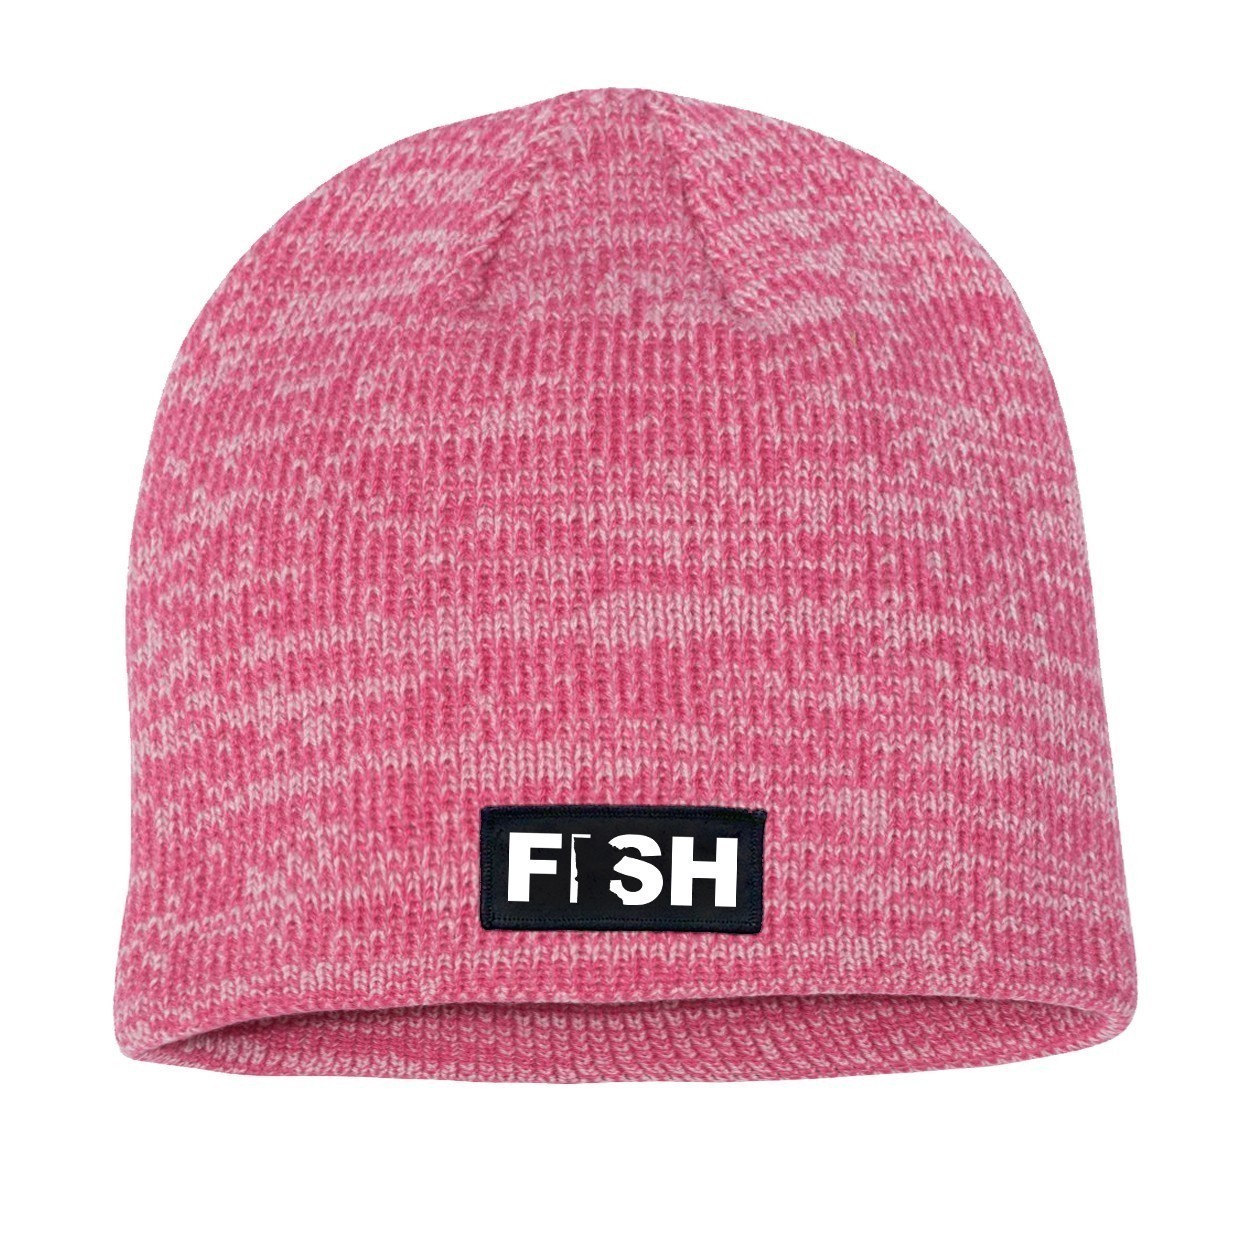 Fish Minnesota Night Out Woven Patch Skully Marled Knit Beanie Pink/Dark Pink (White Logo)